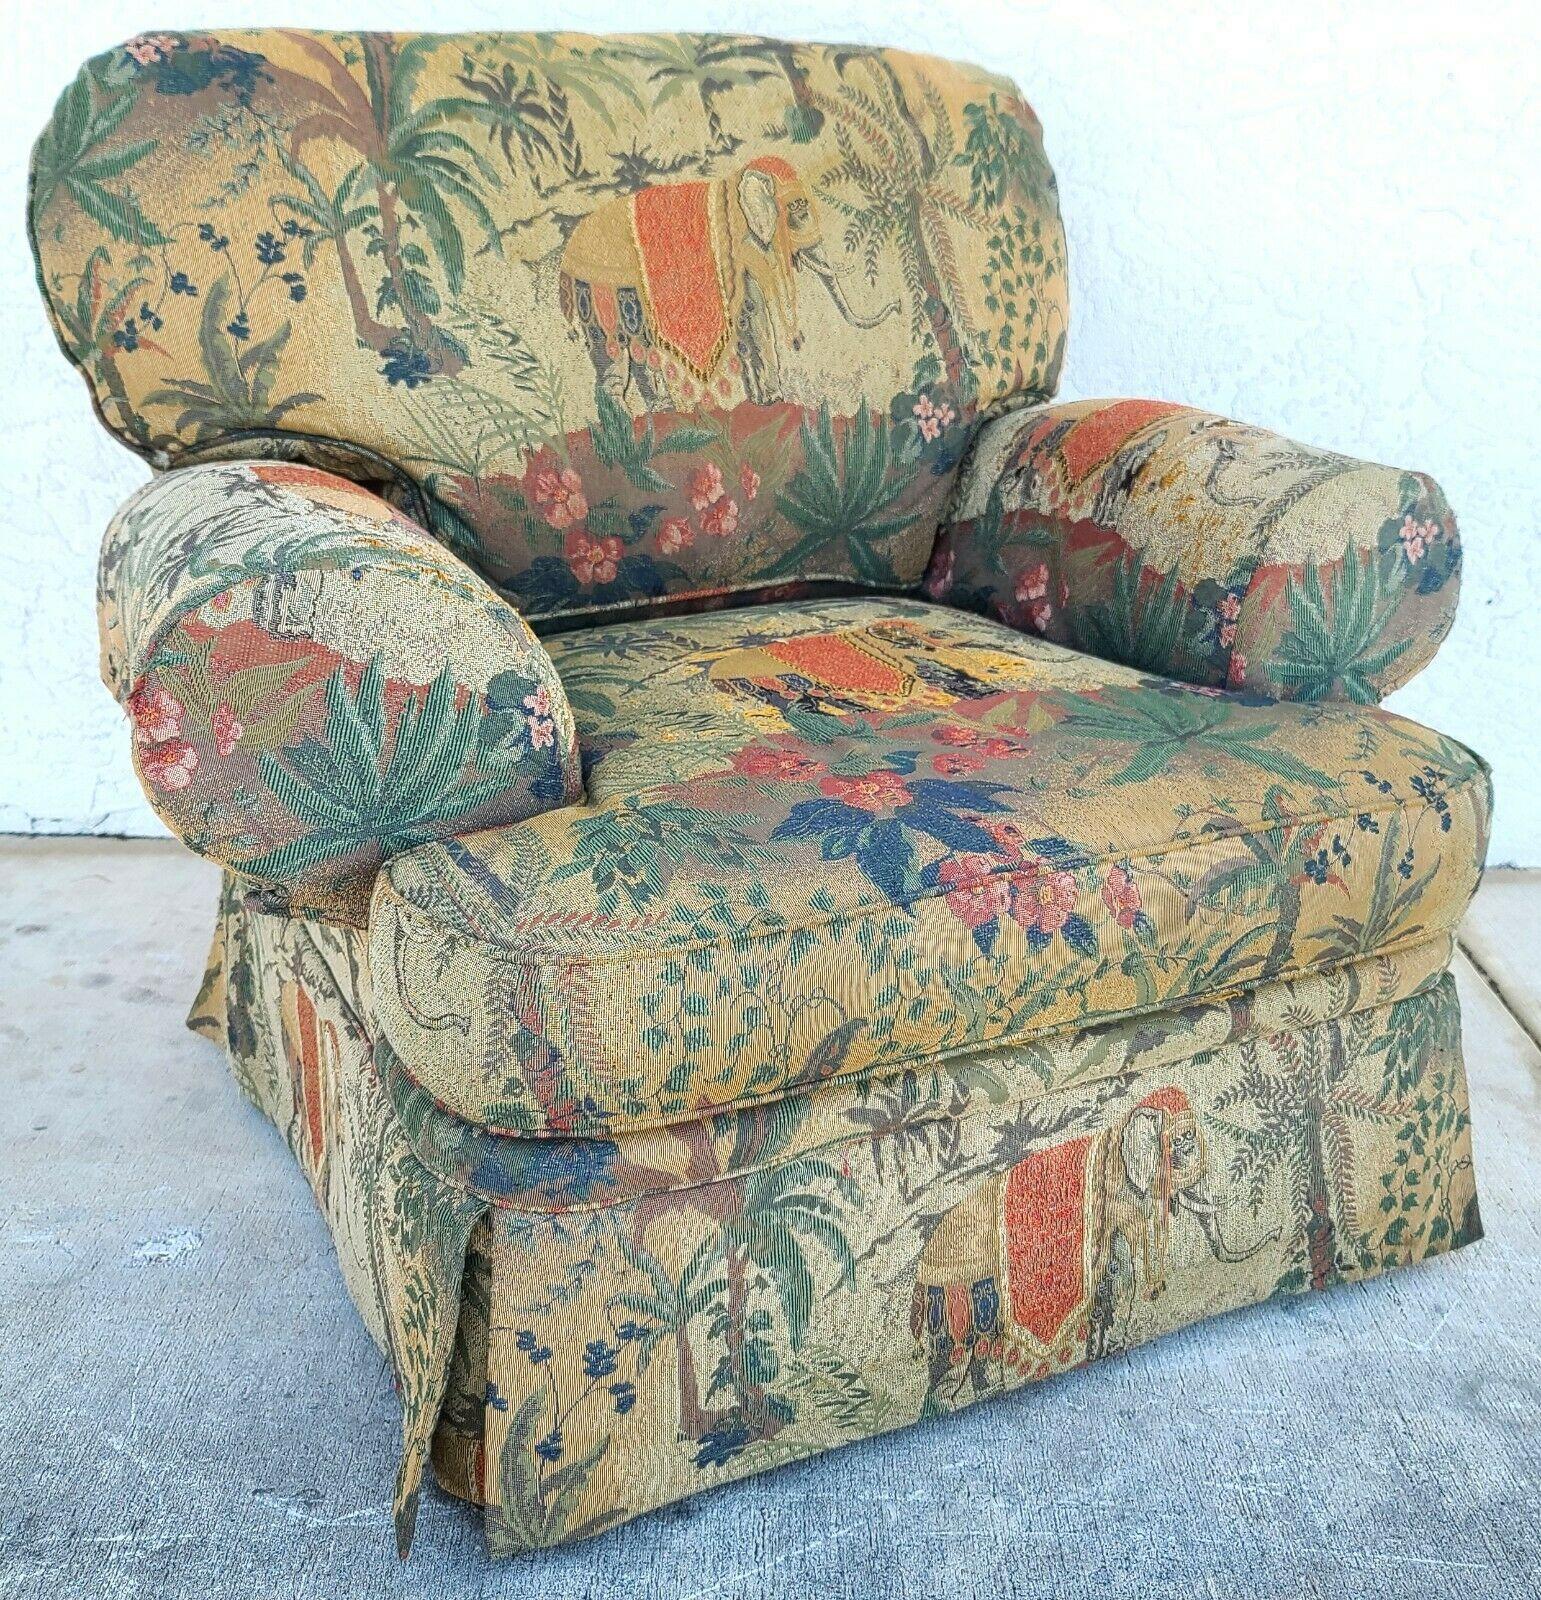 For FULL item description click on CONTINUE READING at the bottom of this page.

Offering One Of Our Recent Palm Beach Estate Fine Furniture Acquisitions Of A
English Style Elephant Lounge Chair & Ottoman by MICHAEL THOMAS
Includes 2 matching throw